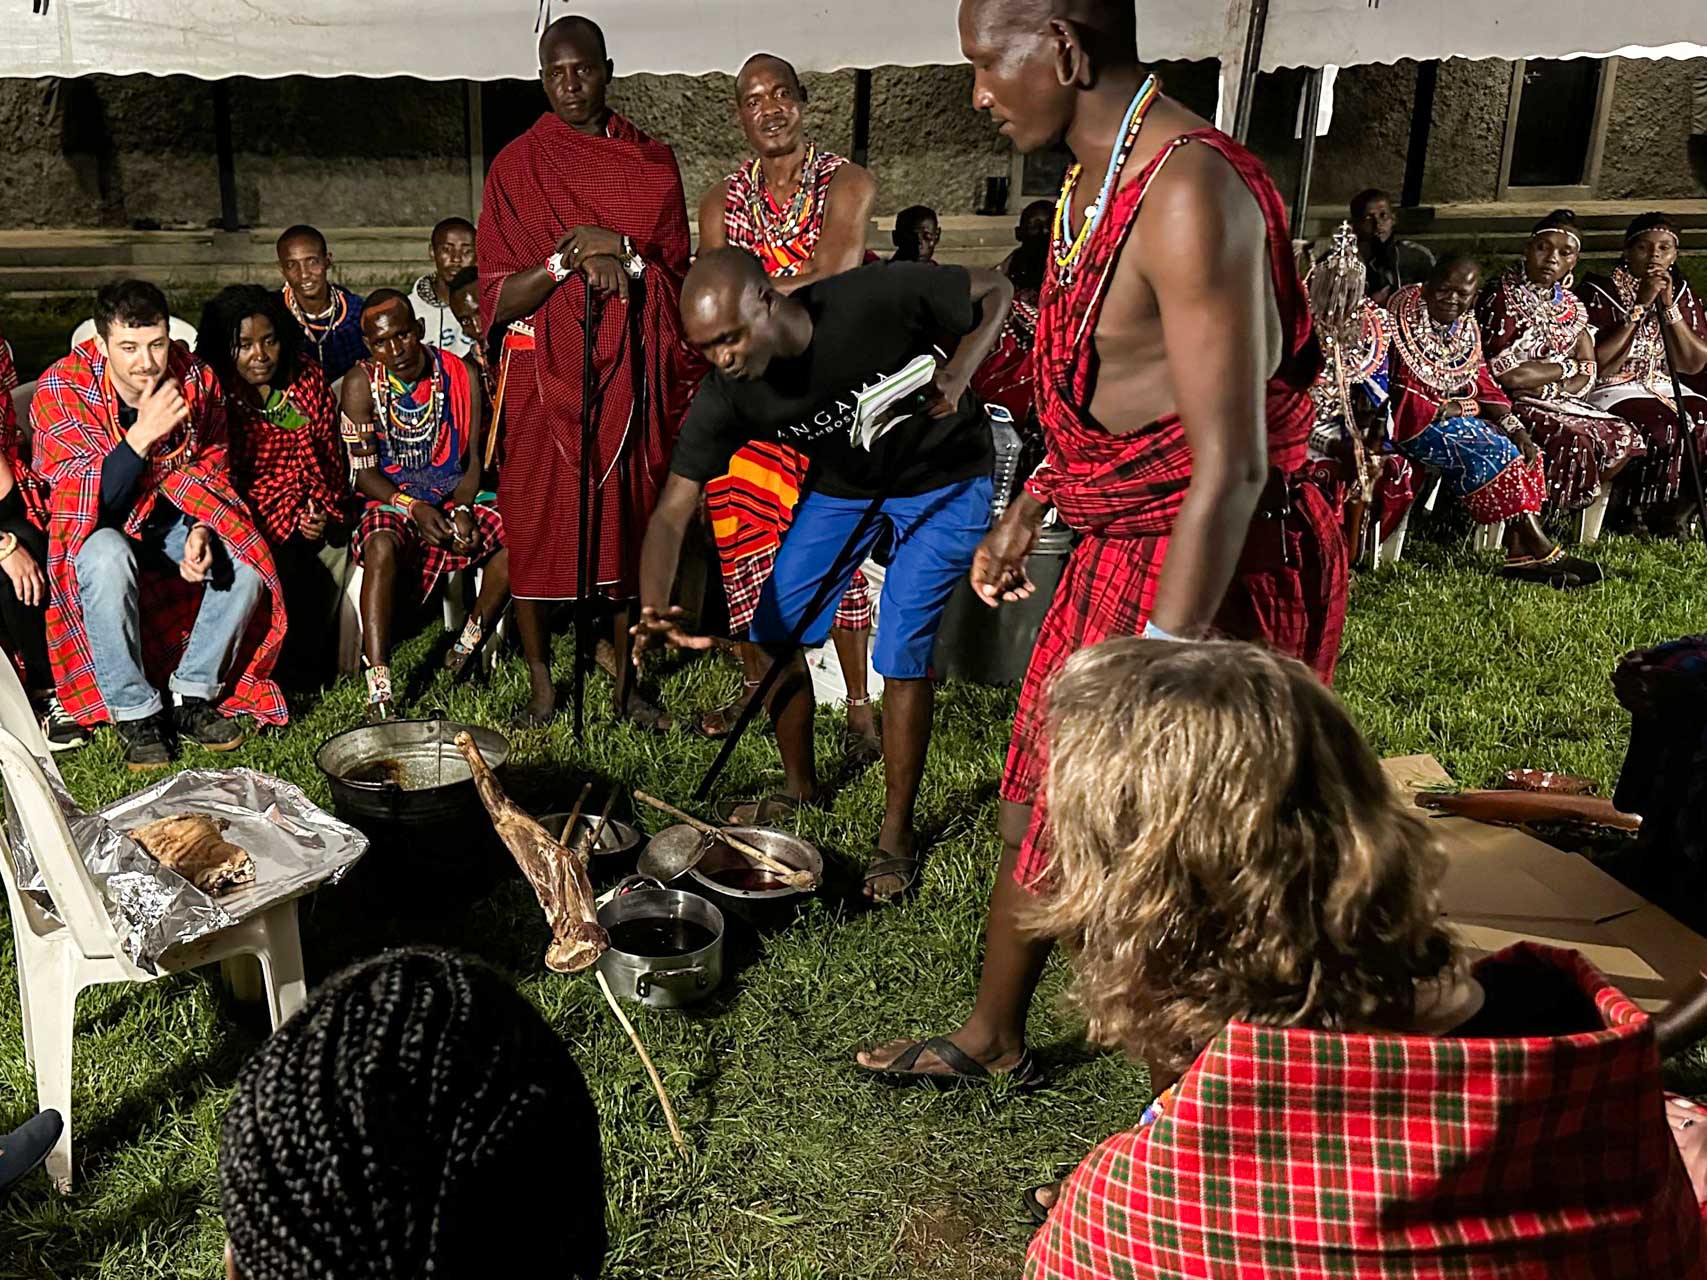 Next on the menu was goat meat and Isaac helped translate as Saruni Mokoi described the delicacy 